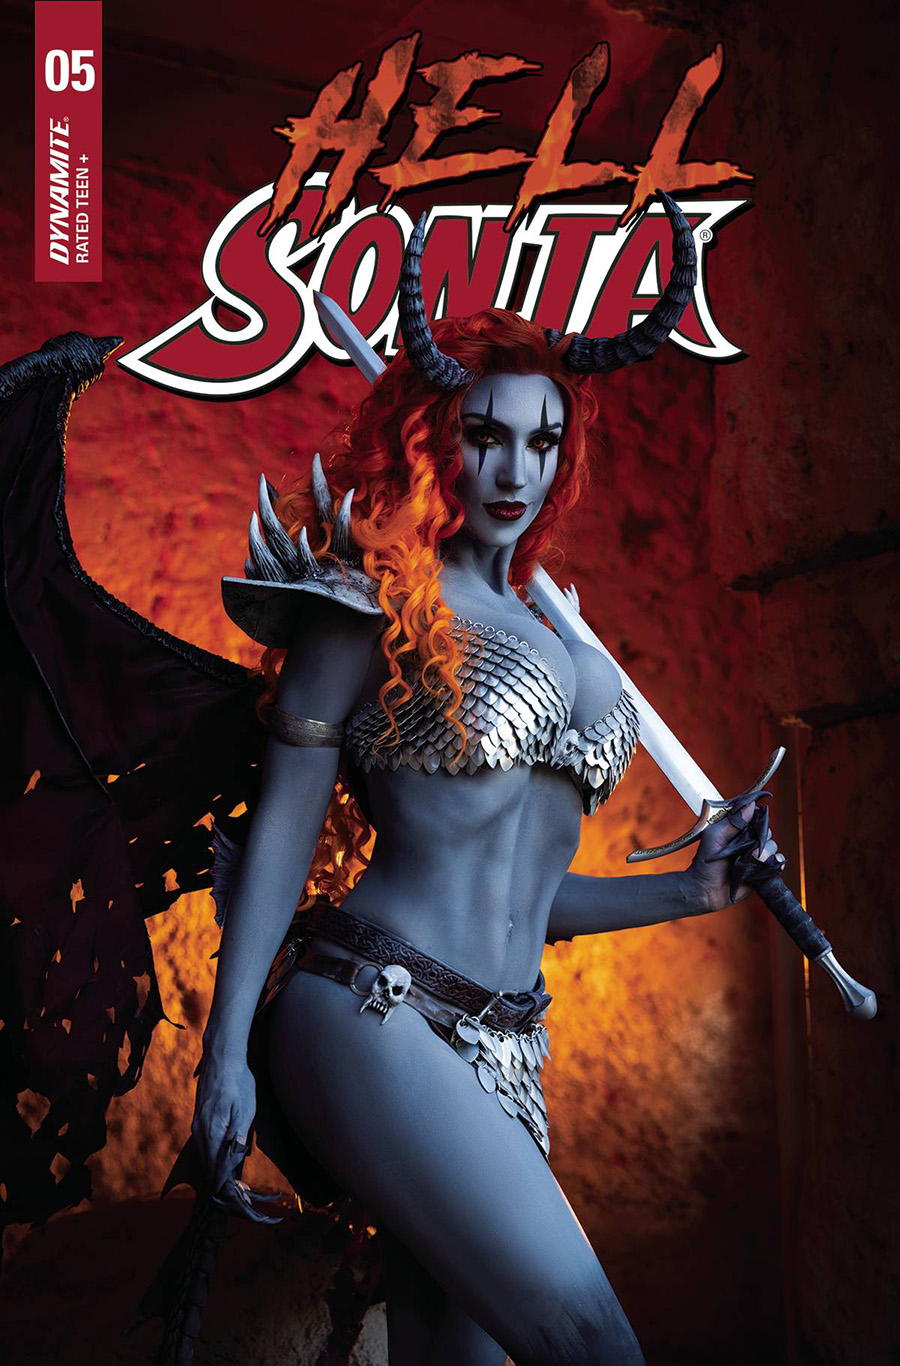 Hell Sonja #5 Cover E Variant Gracie The Cosplay Lass Cosplay Photo Cover